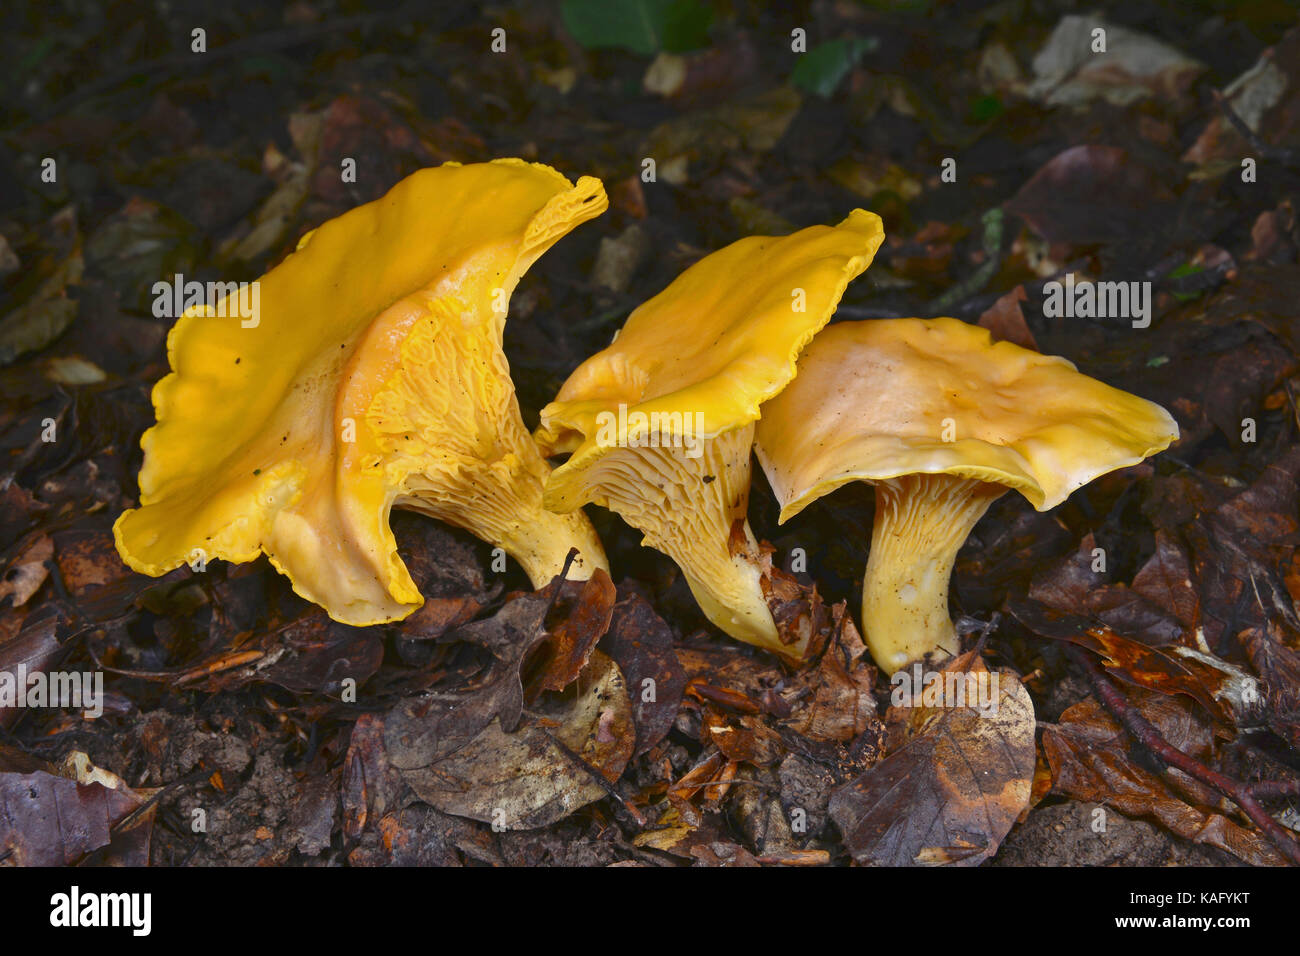 Yellow Chanterelle (Cantharellus cibarius). Mushrooms on the forest floor Stock Photo